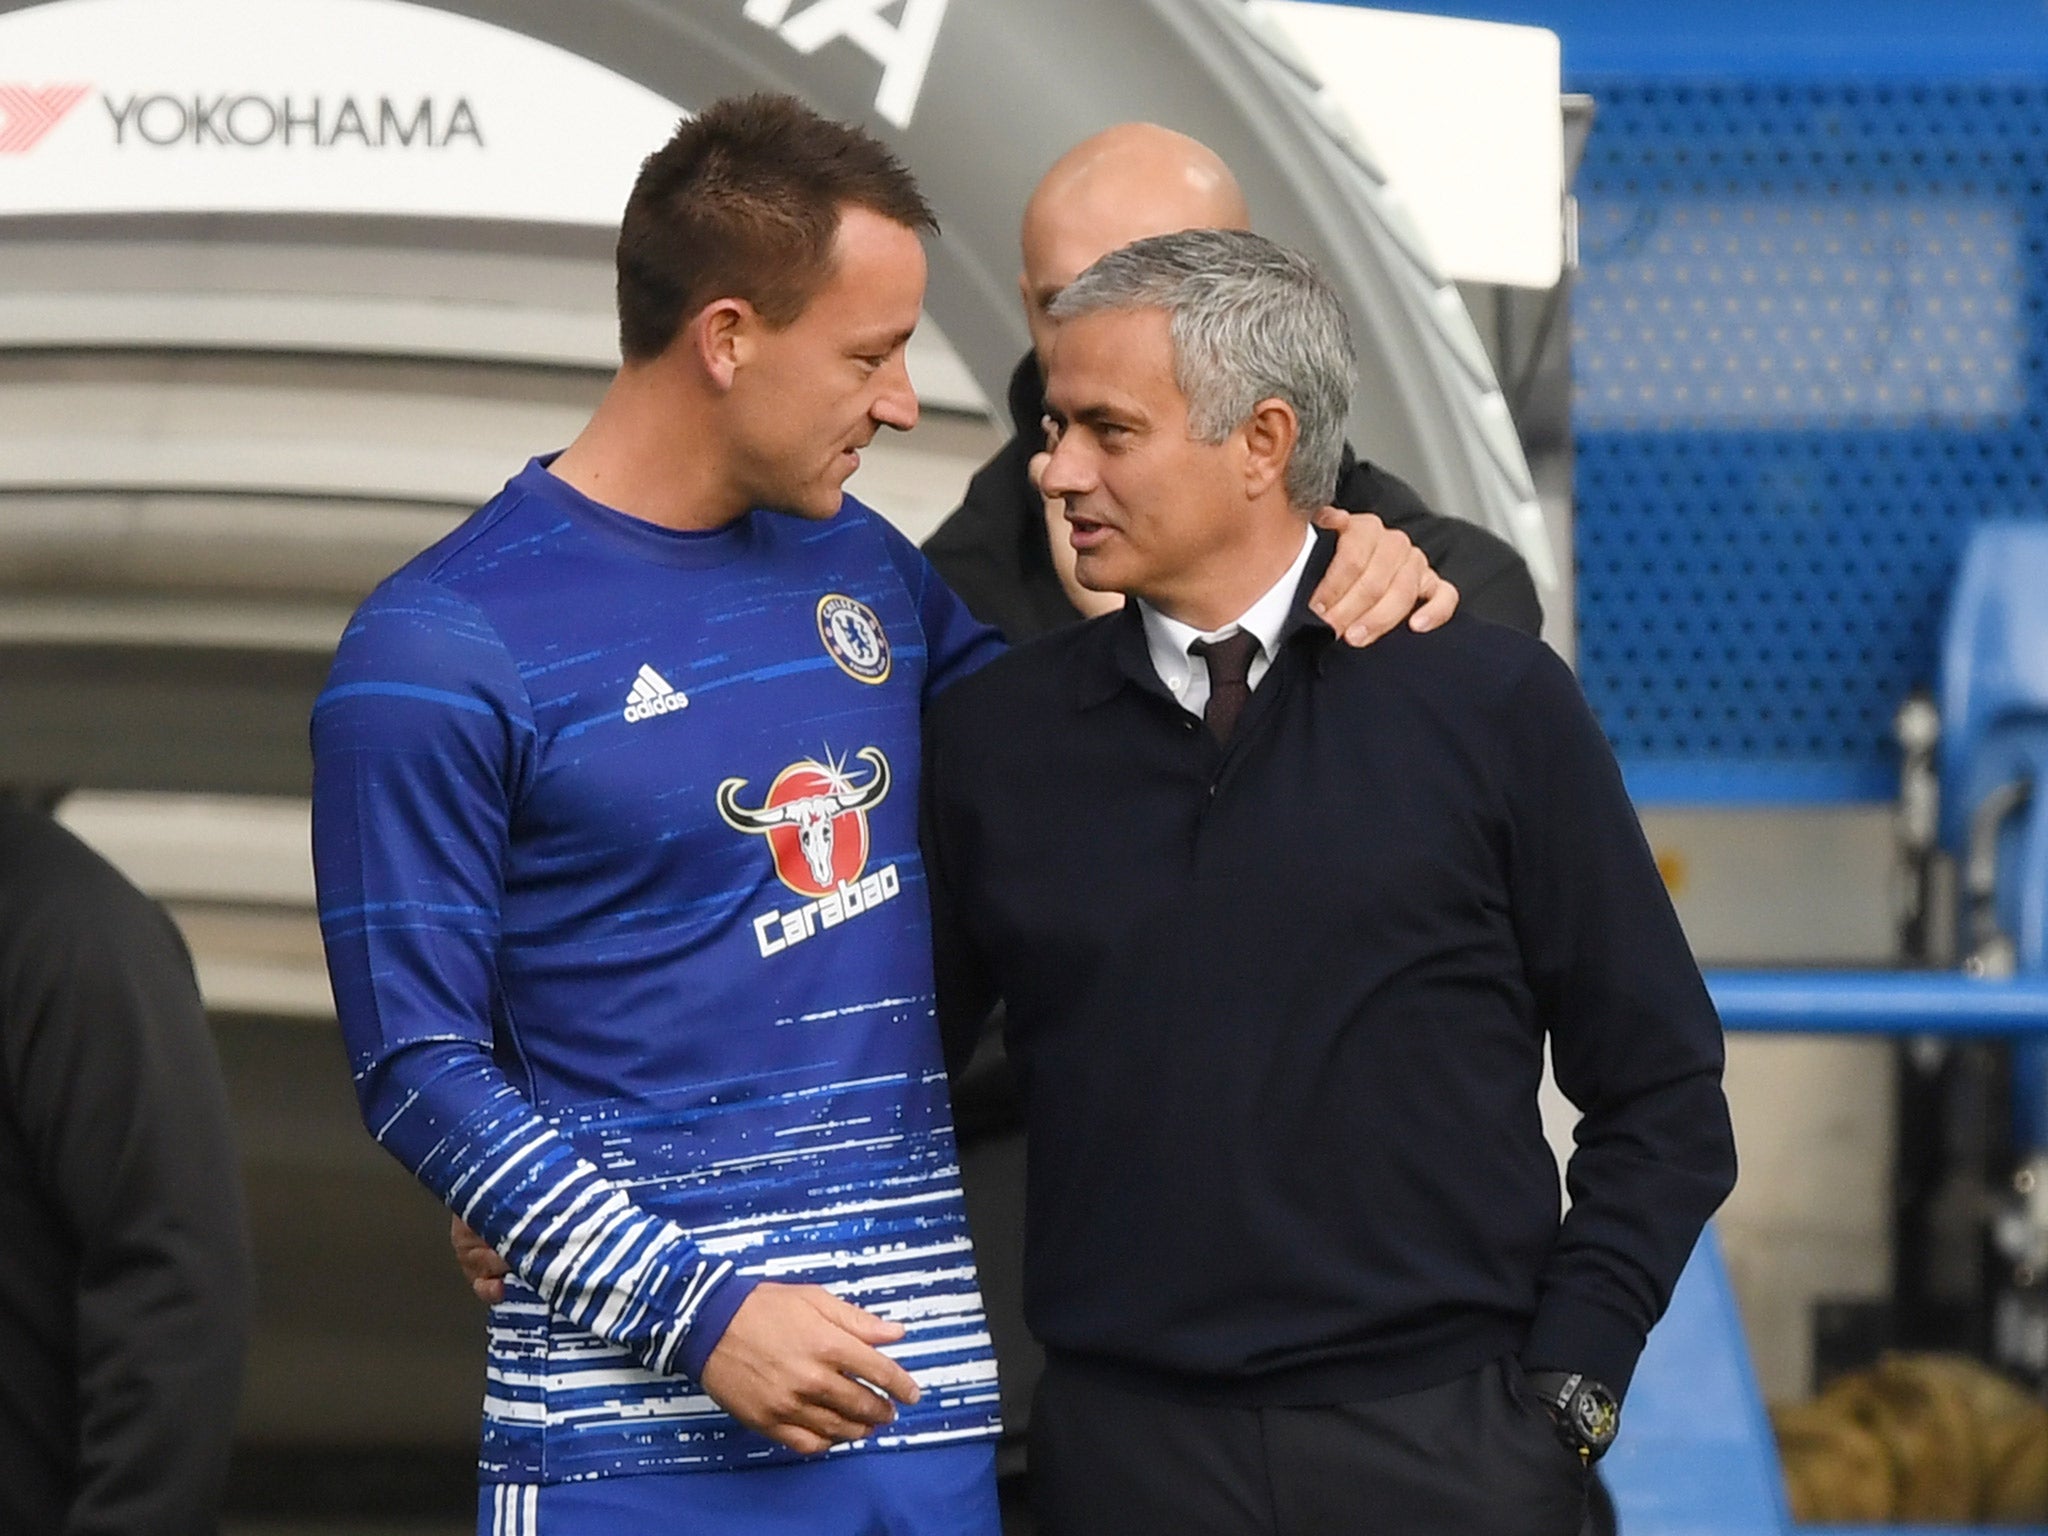 A hug from John Terry is all Jose Mourinho got on his return to Chelsea